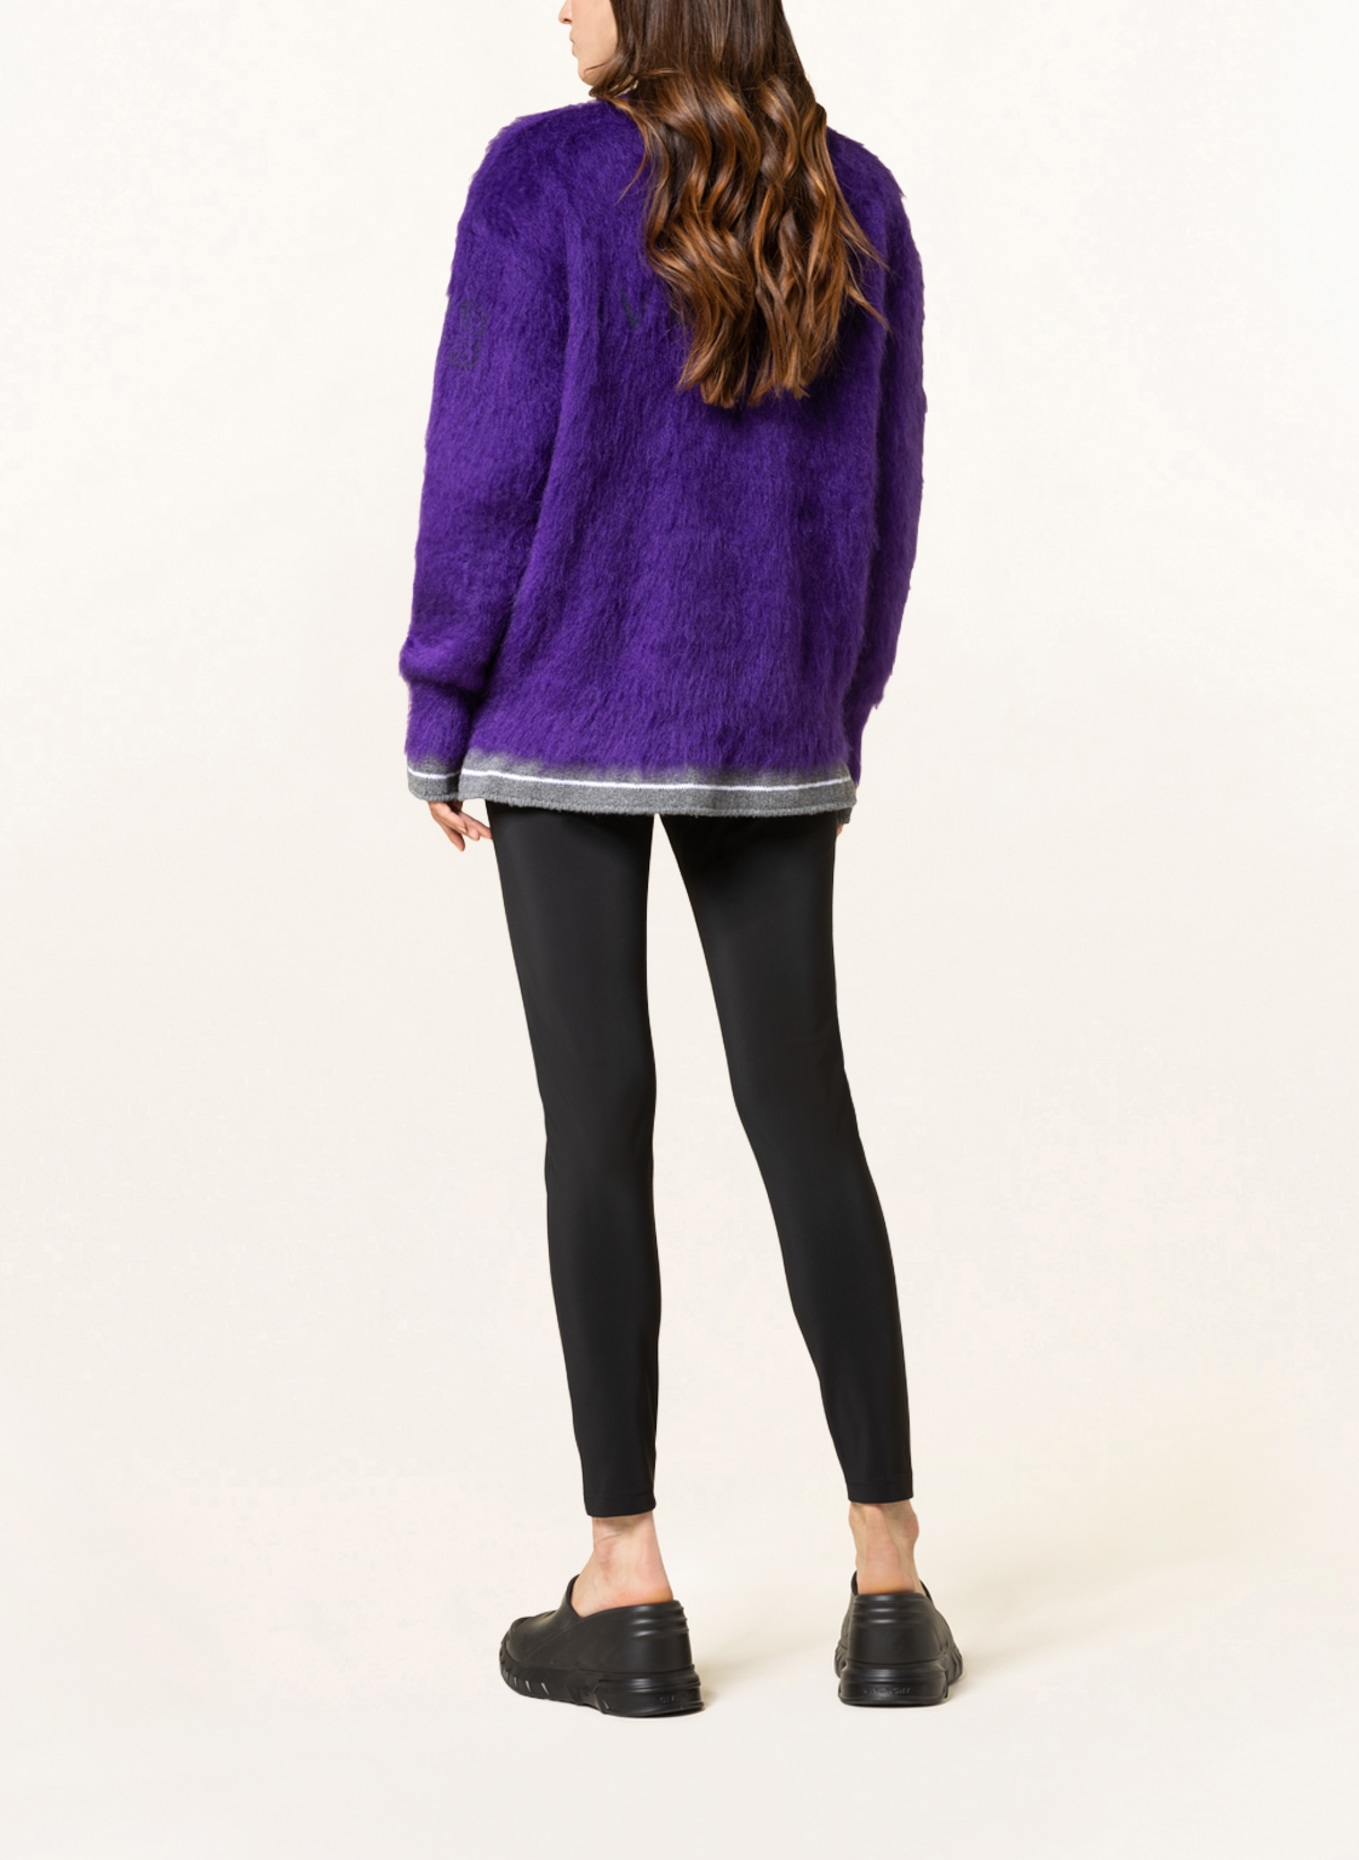 GIVENCHY Oversized-Pullover mit Mohair , Farbe: LILA (Bild 3)